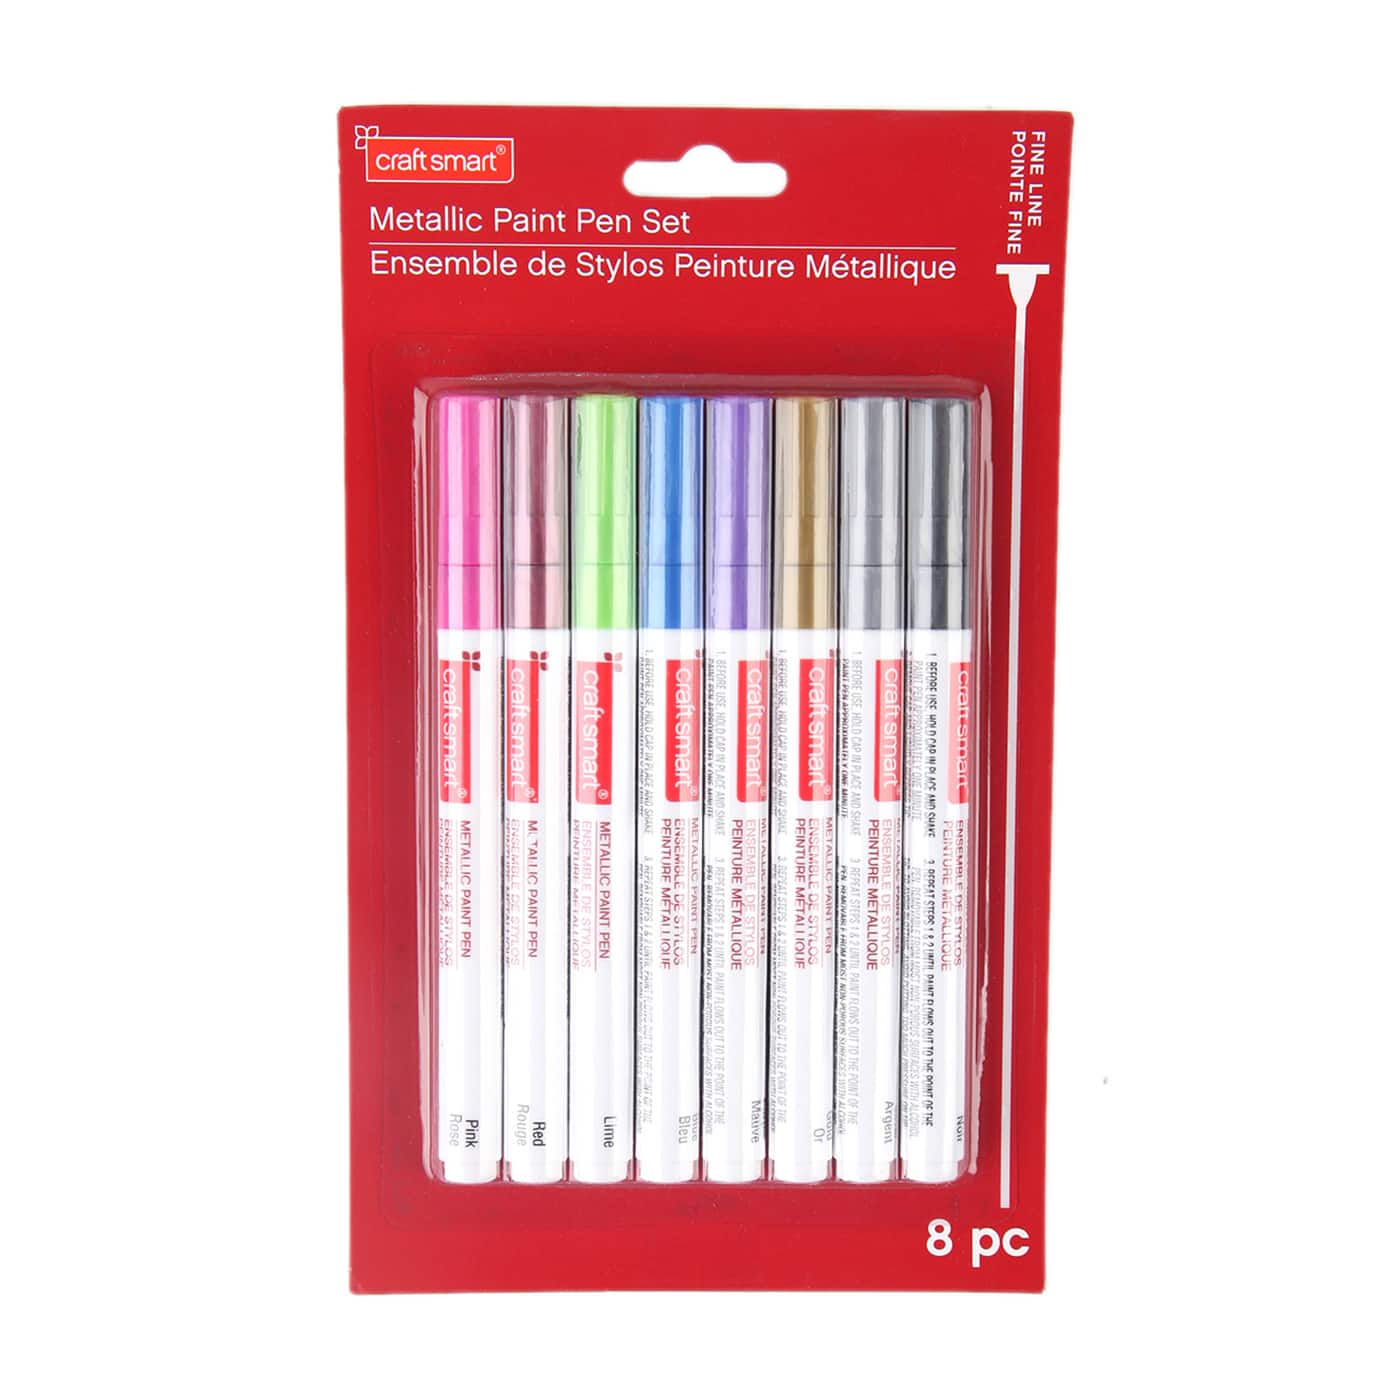 4135 ORIGINAL DRAWING MARKERS 8 COLOR FINE TIP - Factory Select